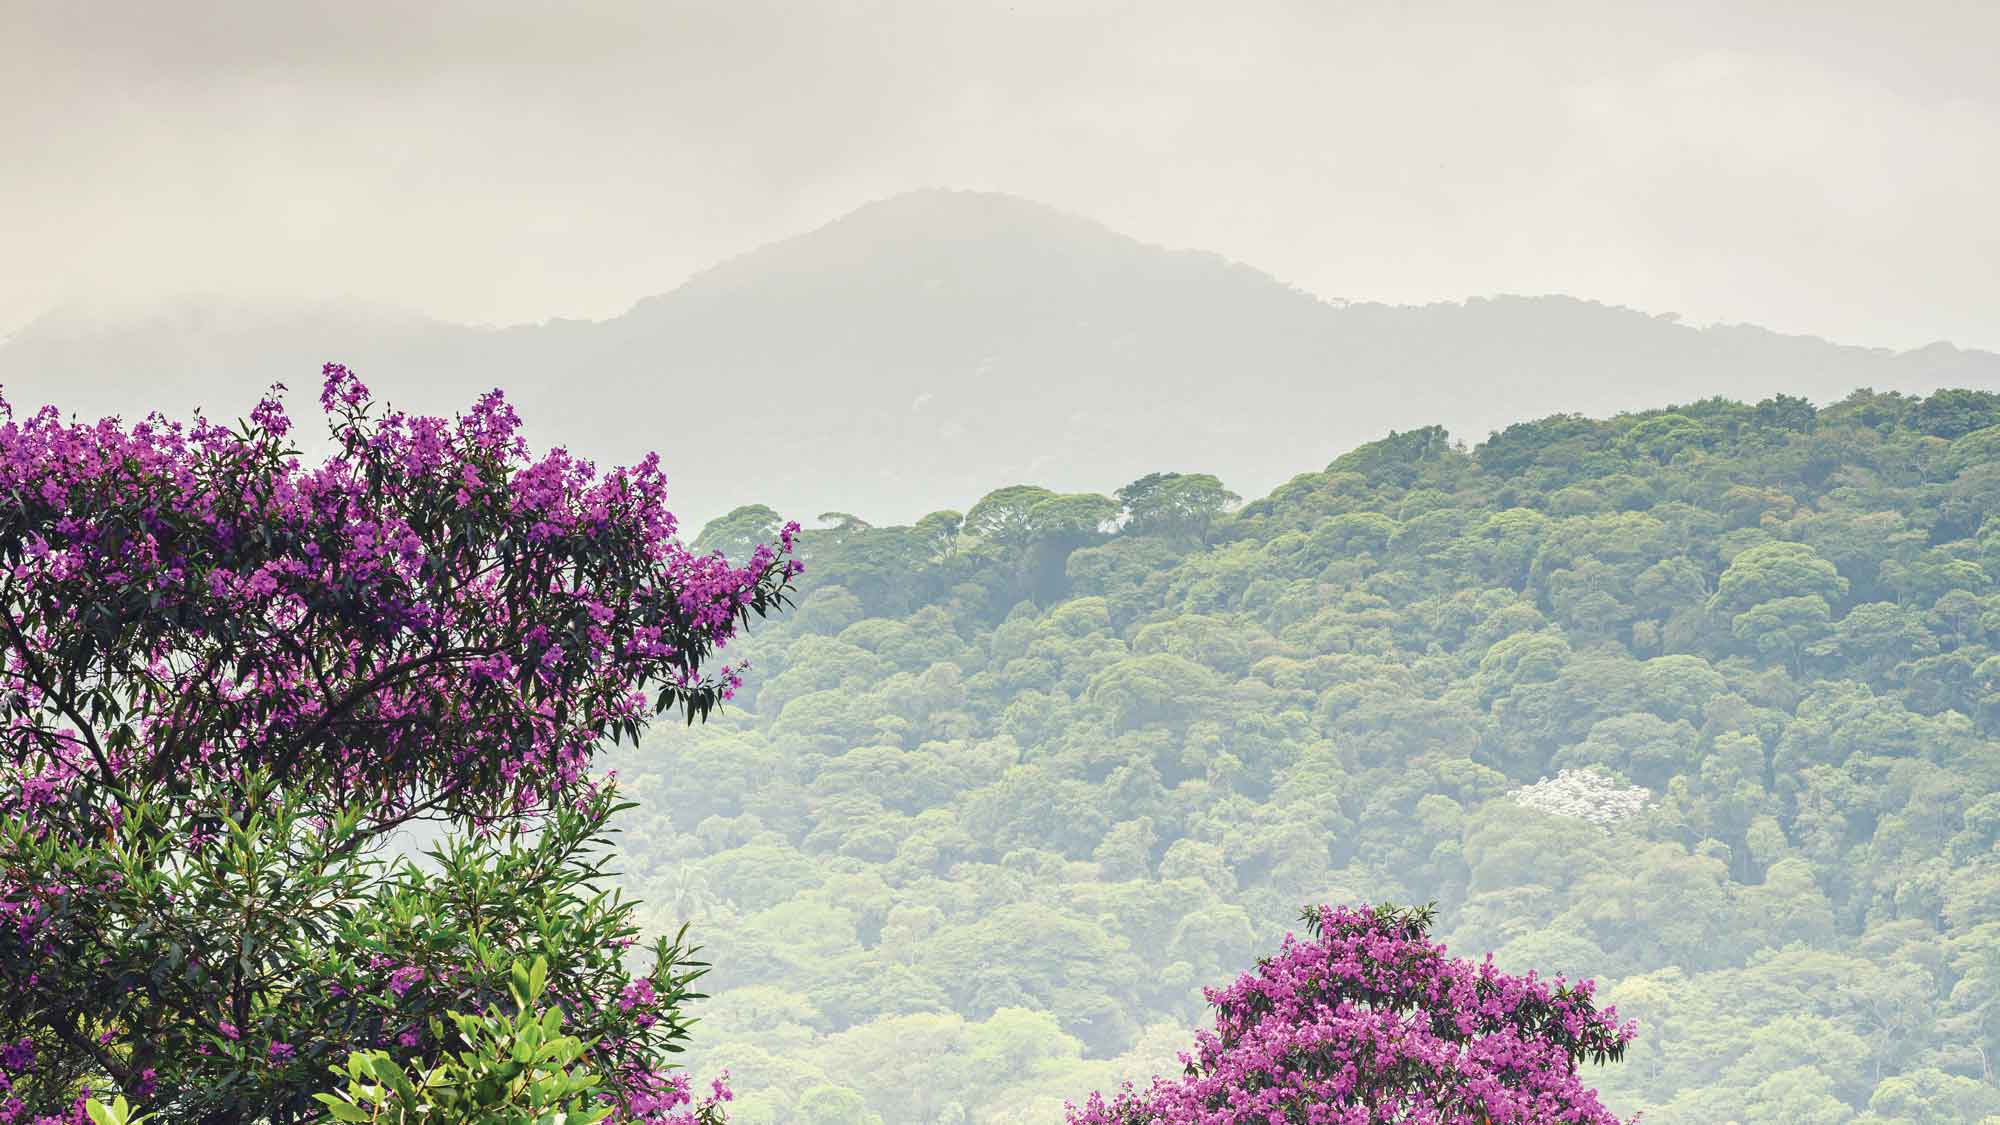 Green forest and pink flowering trees with a misty mountain in the background